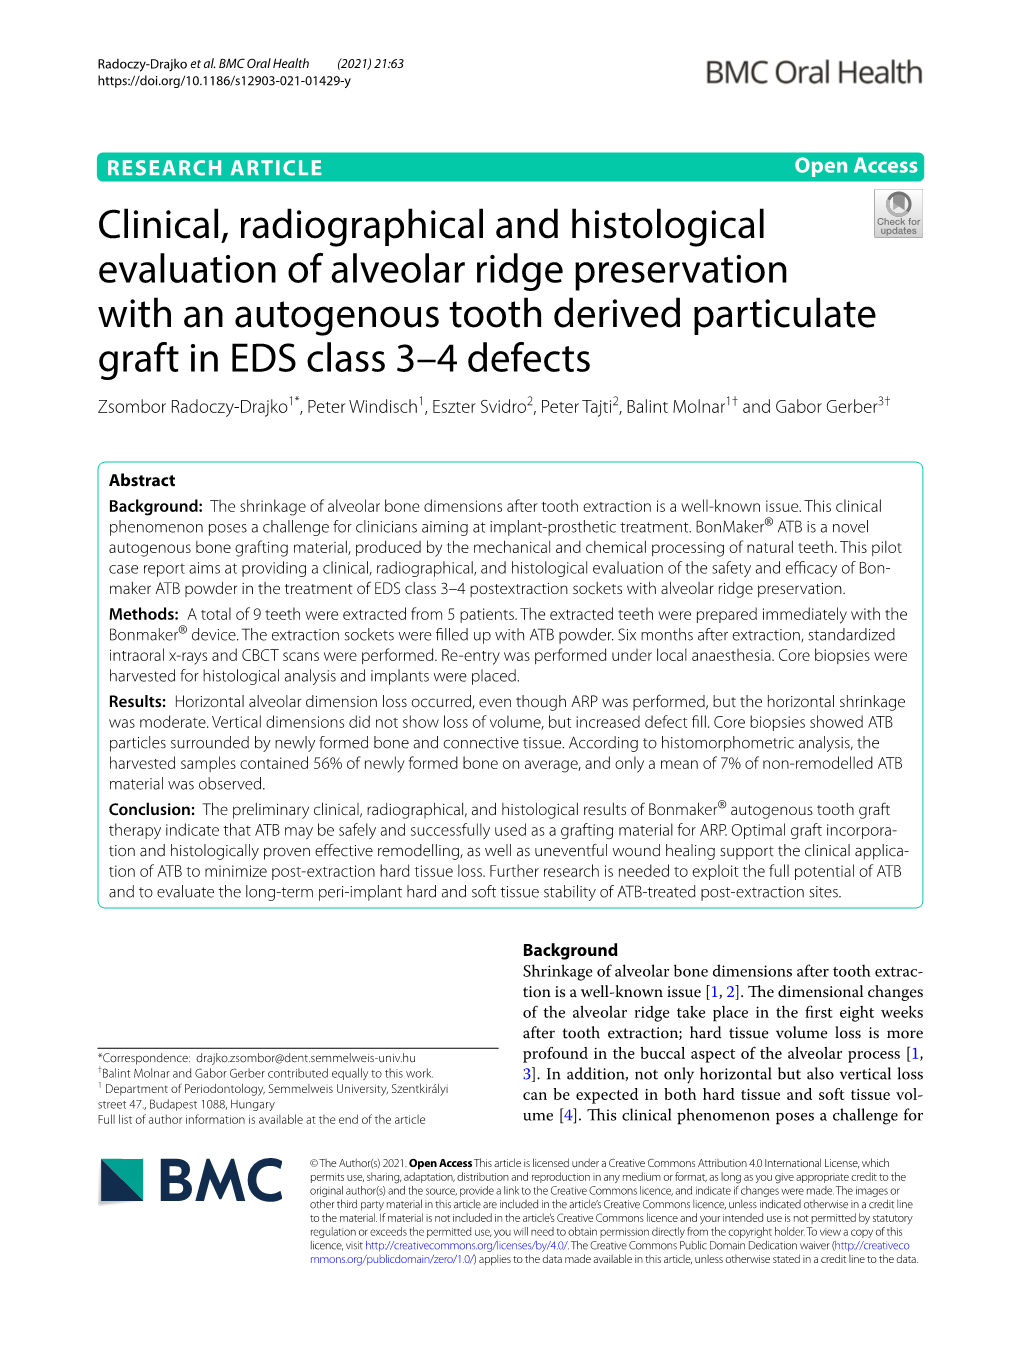 Clinical, Radiographical and Histological Evaluation of Alveolar